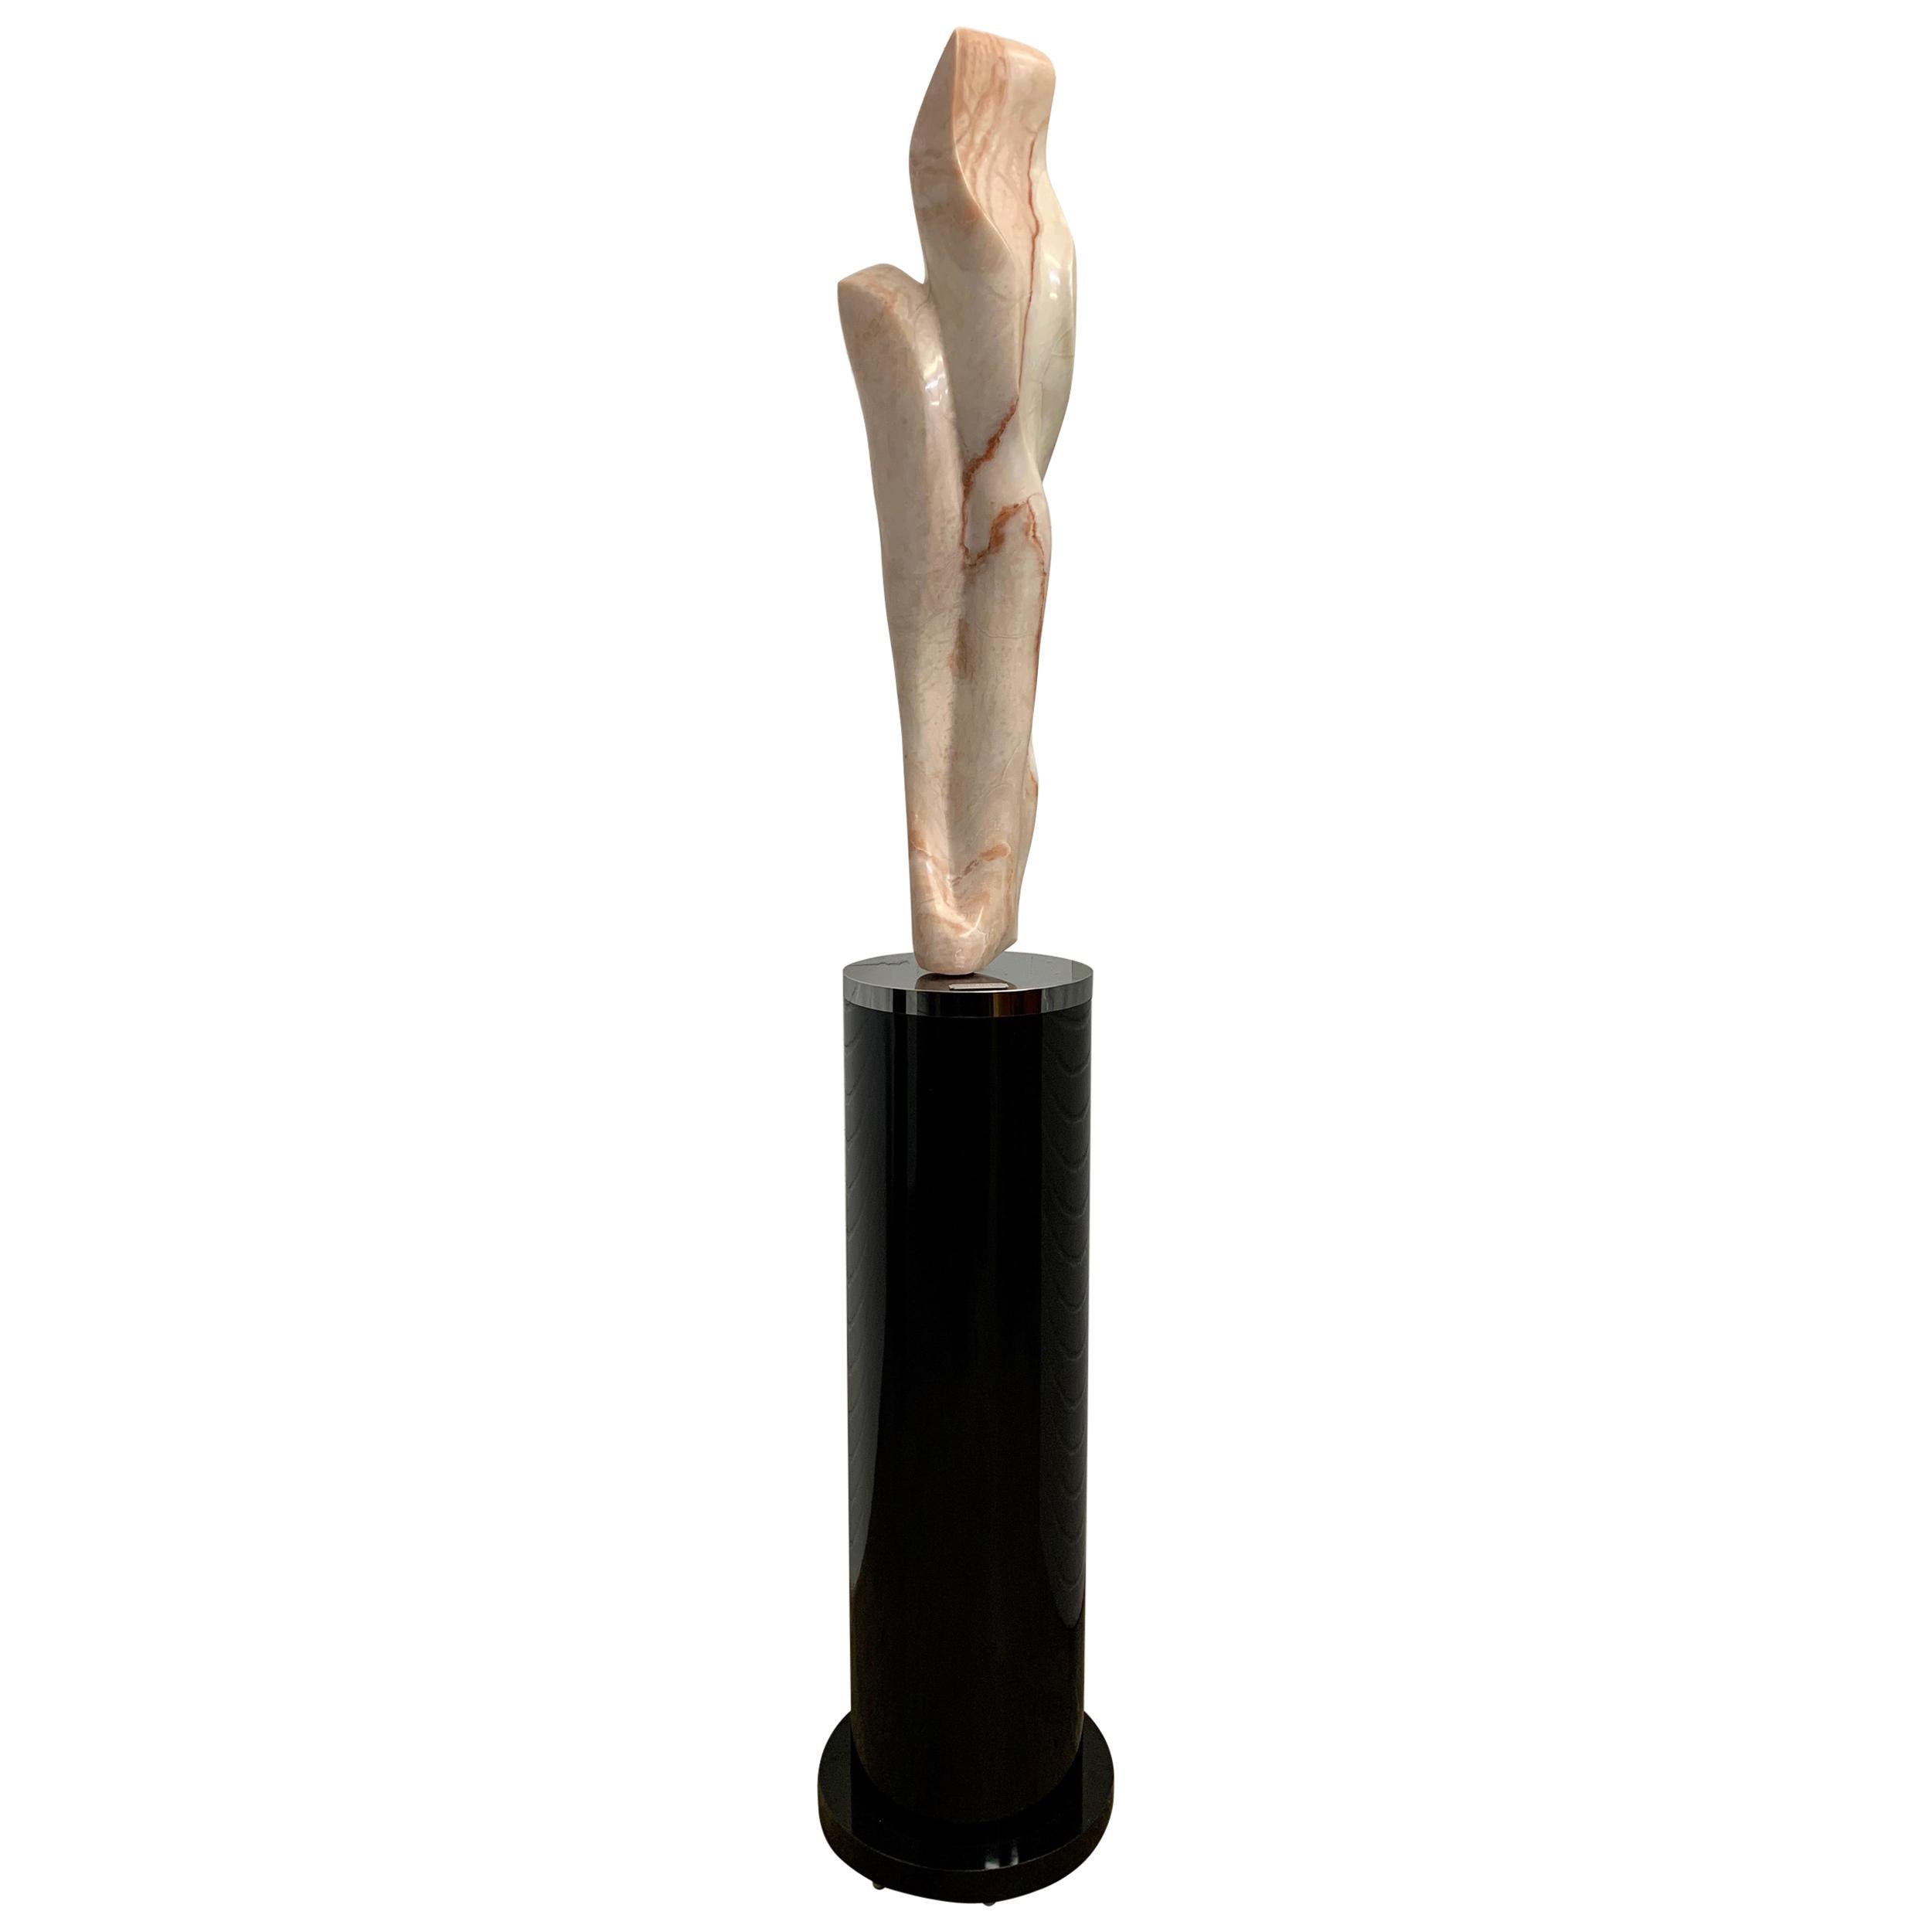 Marble Sculpture Titled "Desert Flower" by Marcia Mitchell Reese For Sale